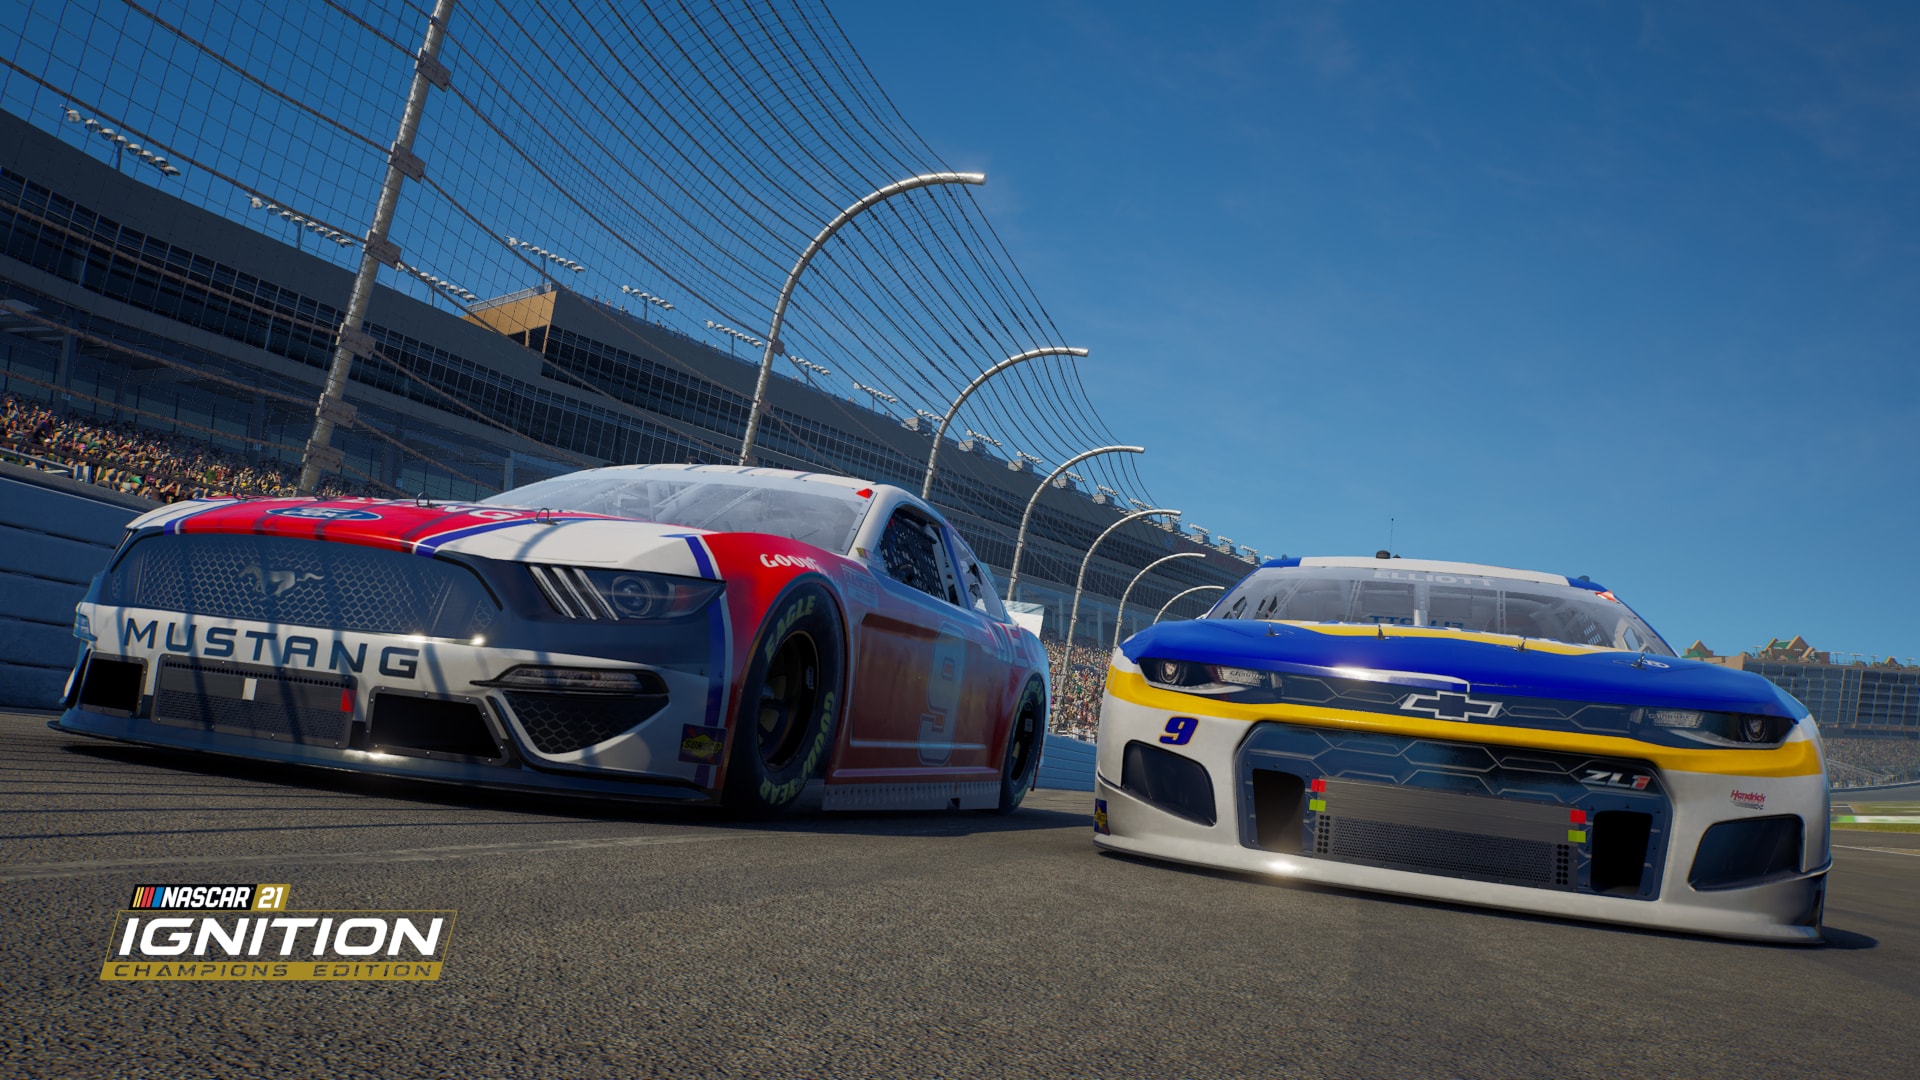 Here Is a First Look at NASCAR 21 Ignition, Coming to PC/Consoles in October